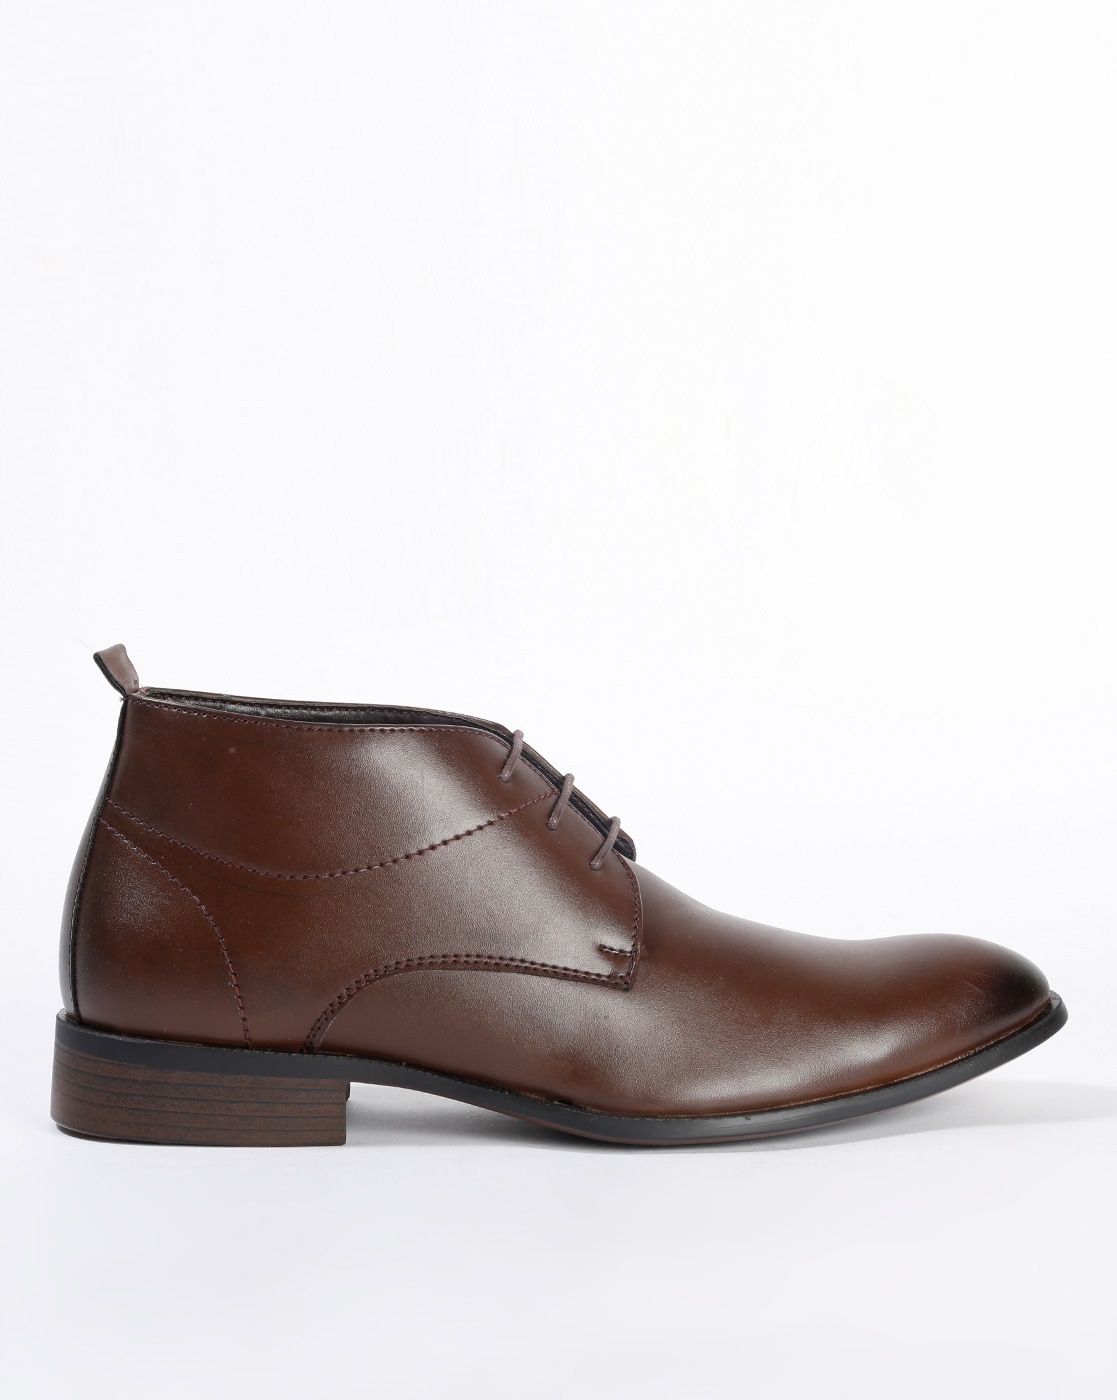 Buy Brown Formal Shoes for Men by Bata 